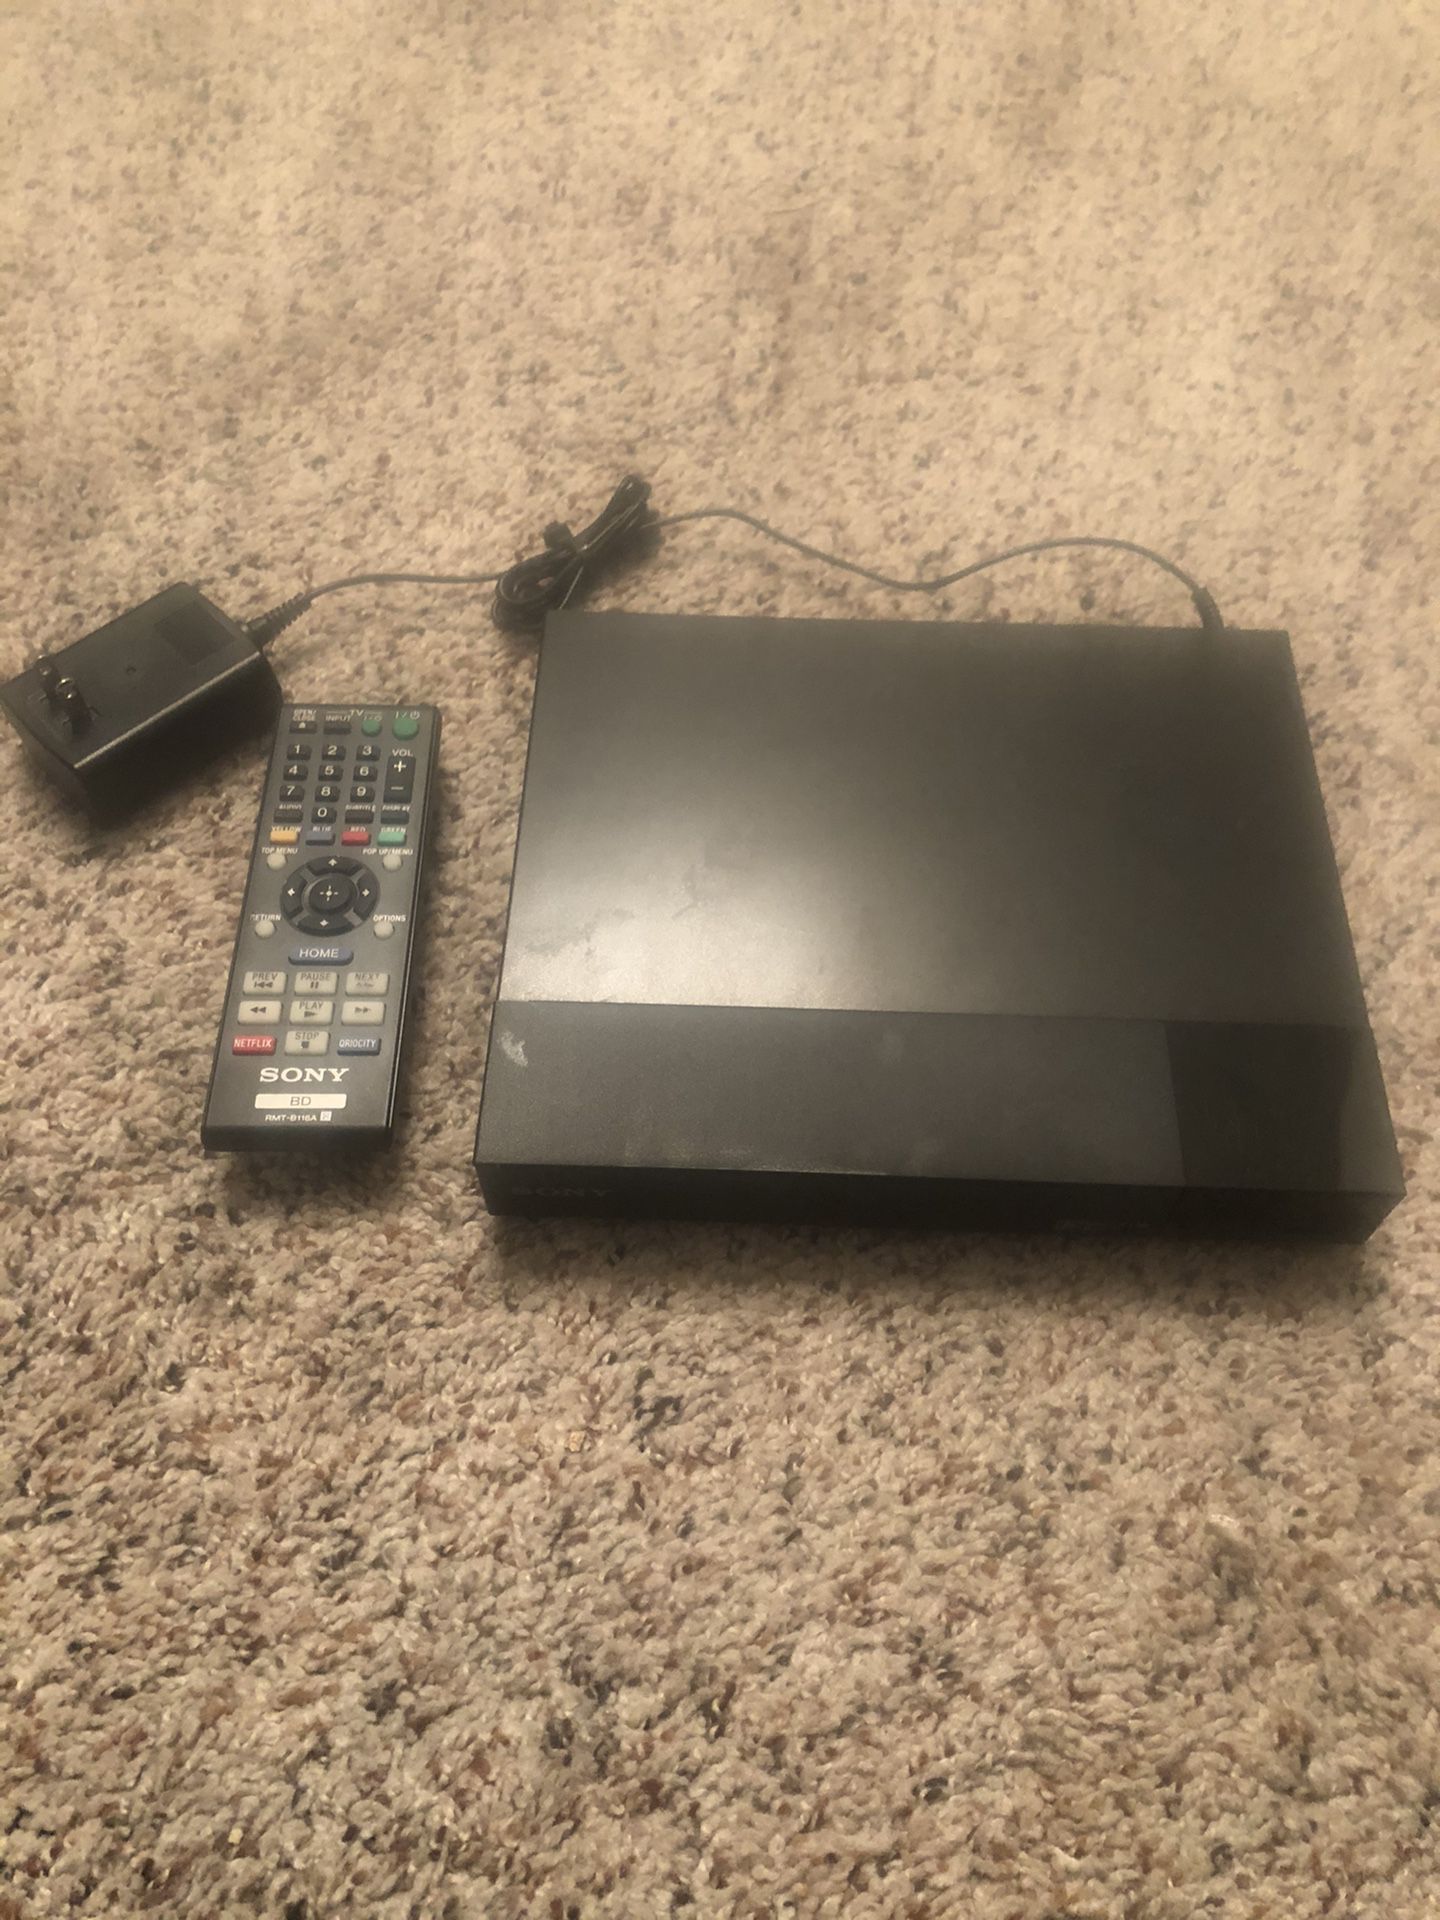 SMART Sony Blu Ray DVD player with remote - Netflix and more